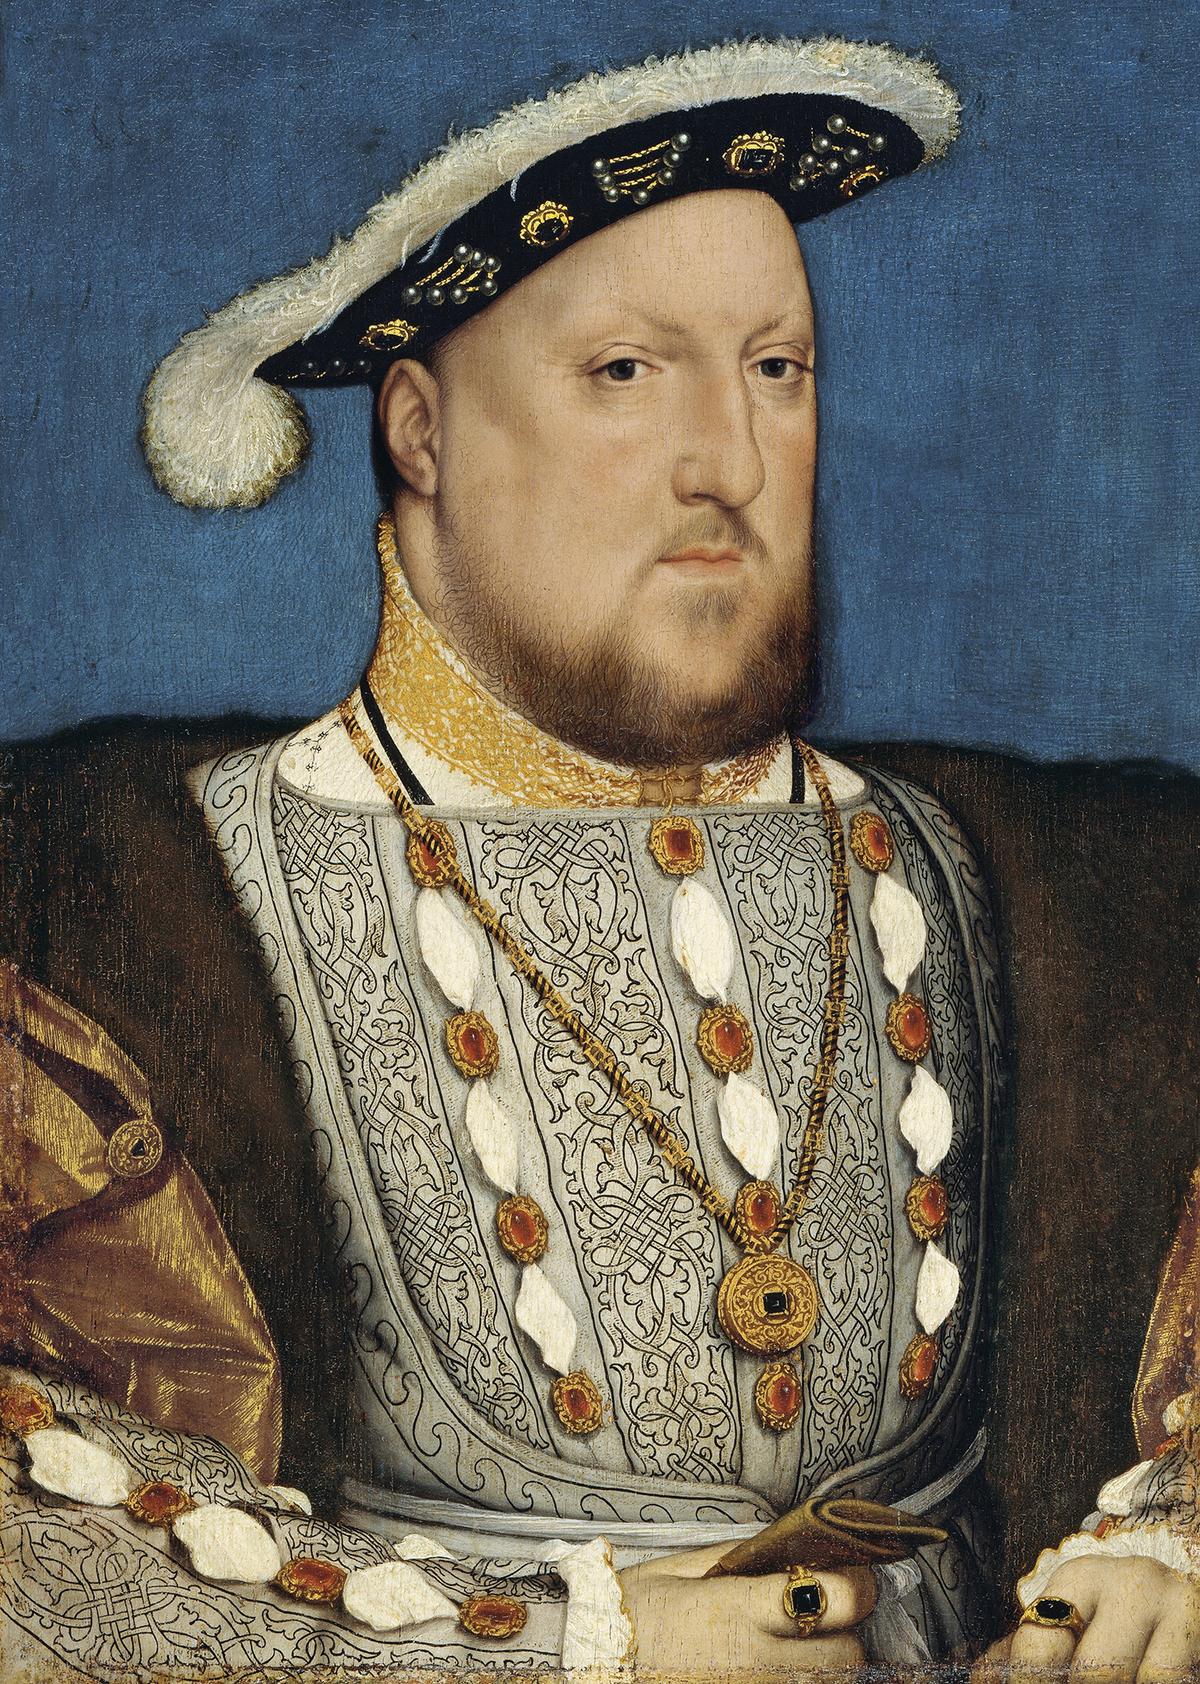 Portrait of Henry VIII of England, circa 1537, by Hans Holbein the Younger. Oil on panel. Thyssen-Bornemisza National Museum, Madrid, Spain. (Public Domain)